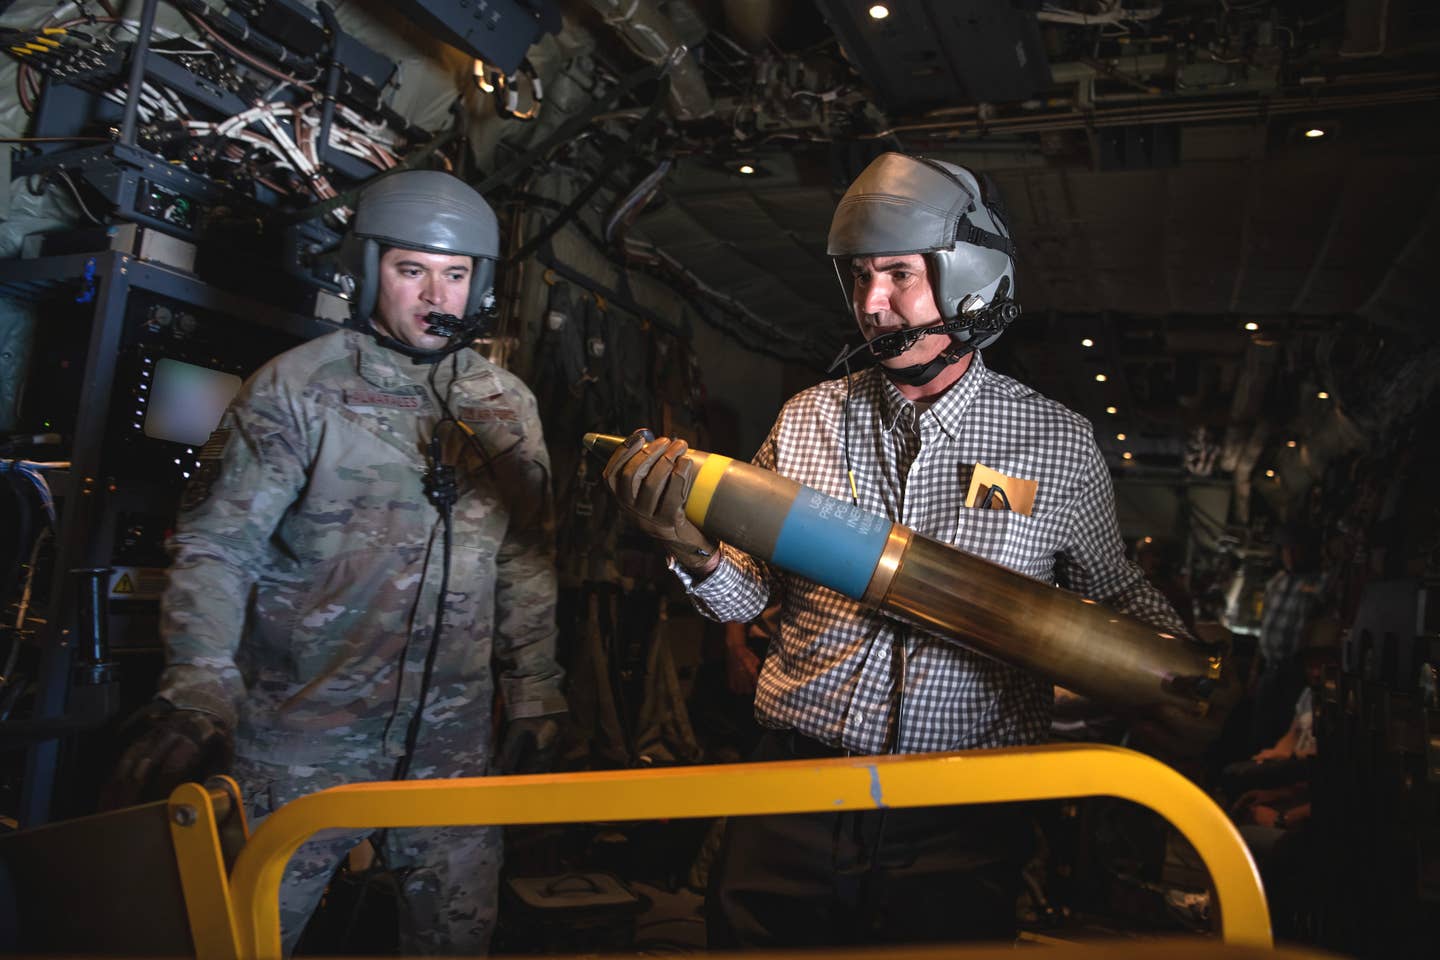 One of the 'honorary commanders' prepares to load a 105mm practice round into the howitzer onboard the AC-130J during the community engagement event at Cannon on August 24.  <em>U.S. Air Force photo.</em>